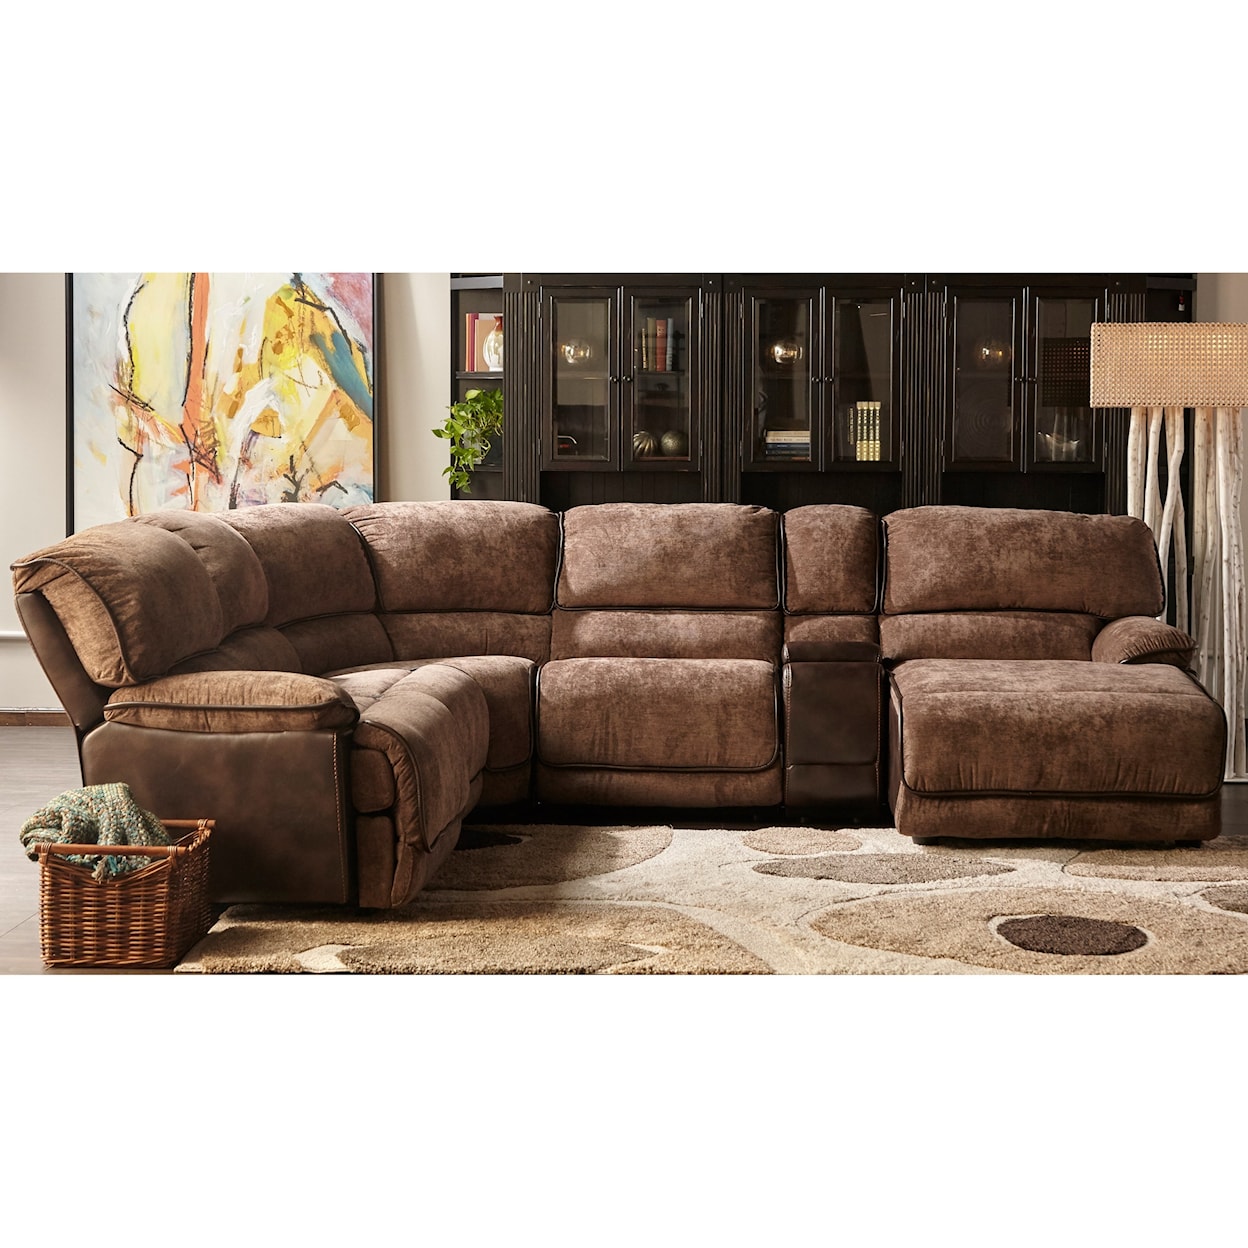 VFM Signature X8706M Power Reclining Sectional with Chaise